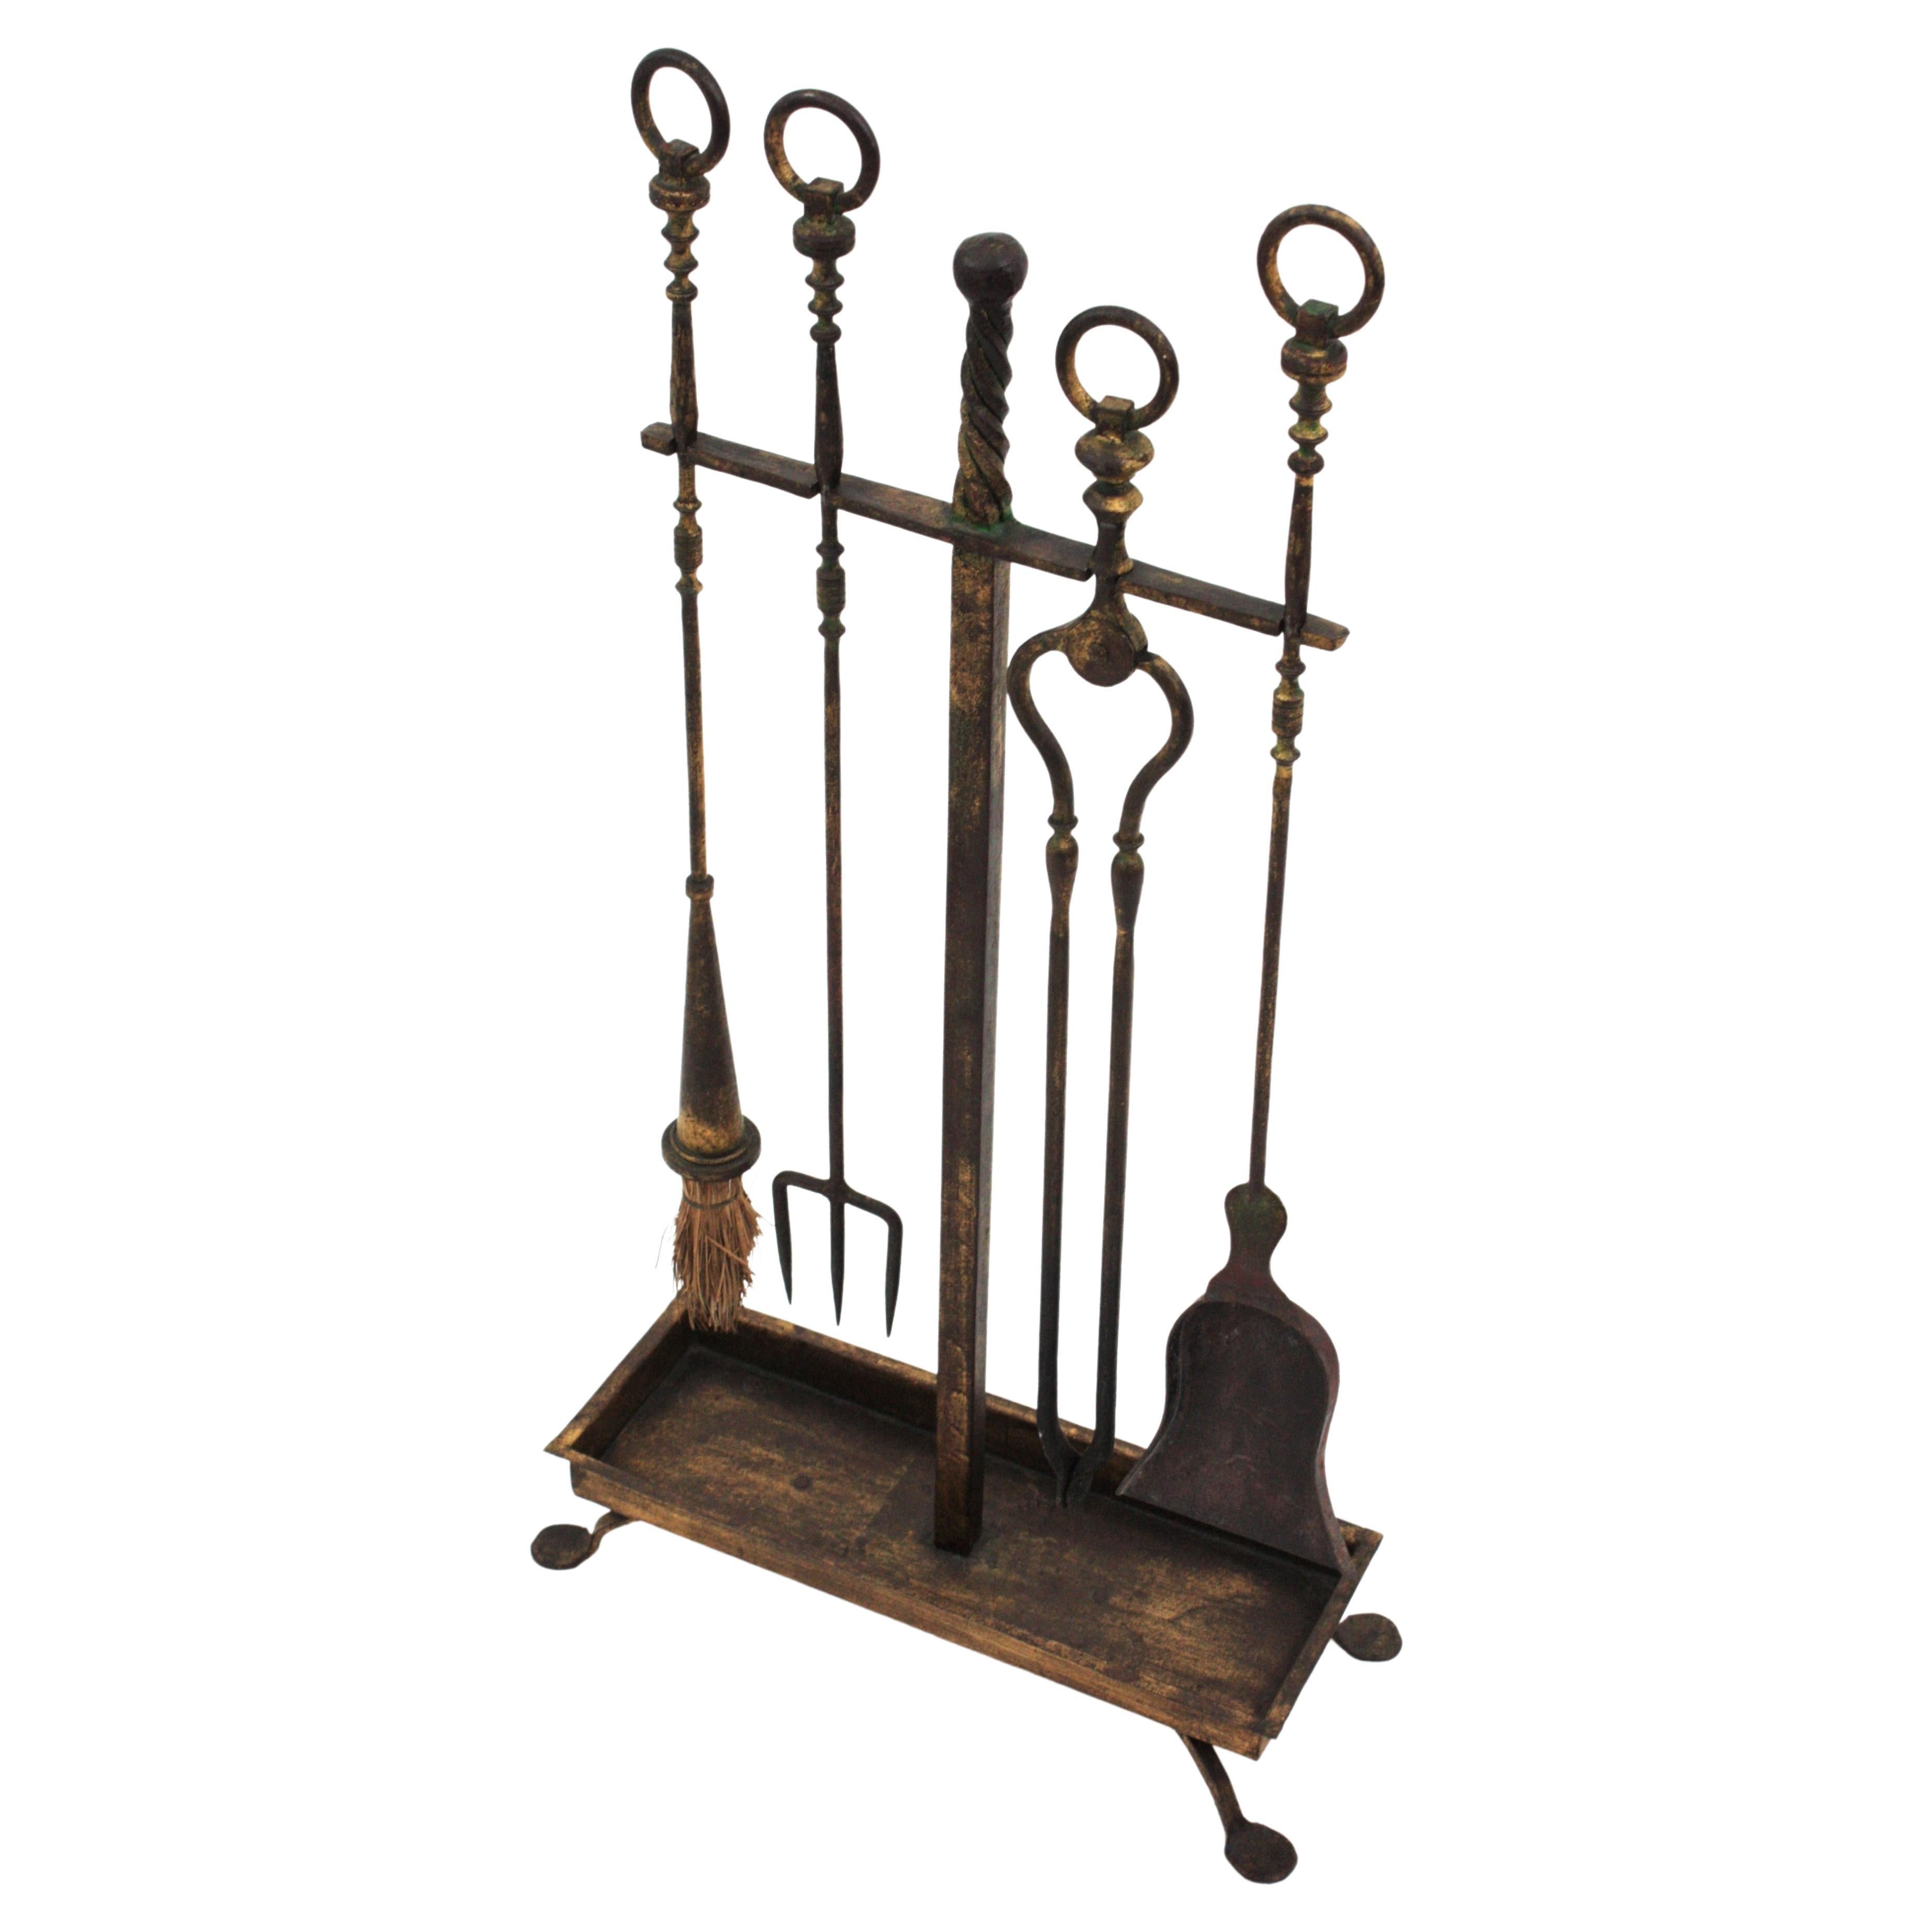 Beautiful Gothic style hand forged antique fireplace tool set on stand. Spain, 1930s.
The set includes four hand forged iron tools : a shovel, a log poker, broom, and tongs. The rack stands up on a four footed rectangular base with a cross shaped